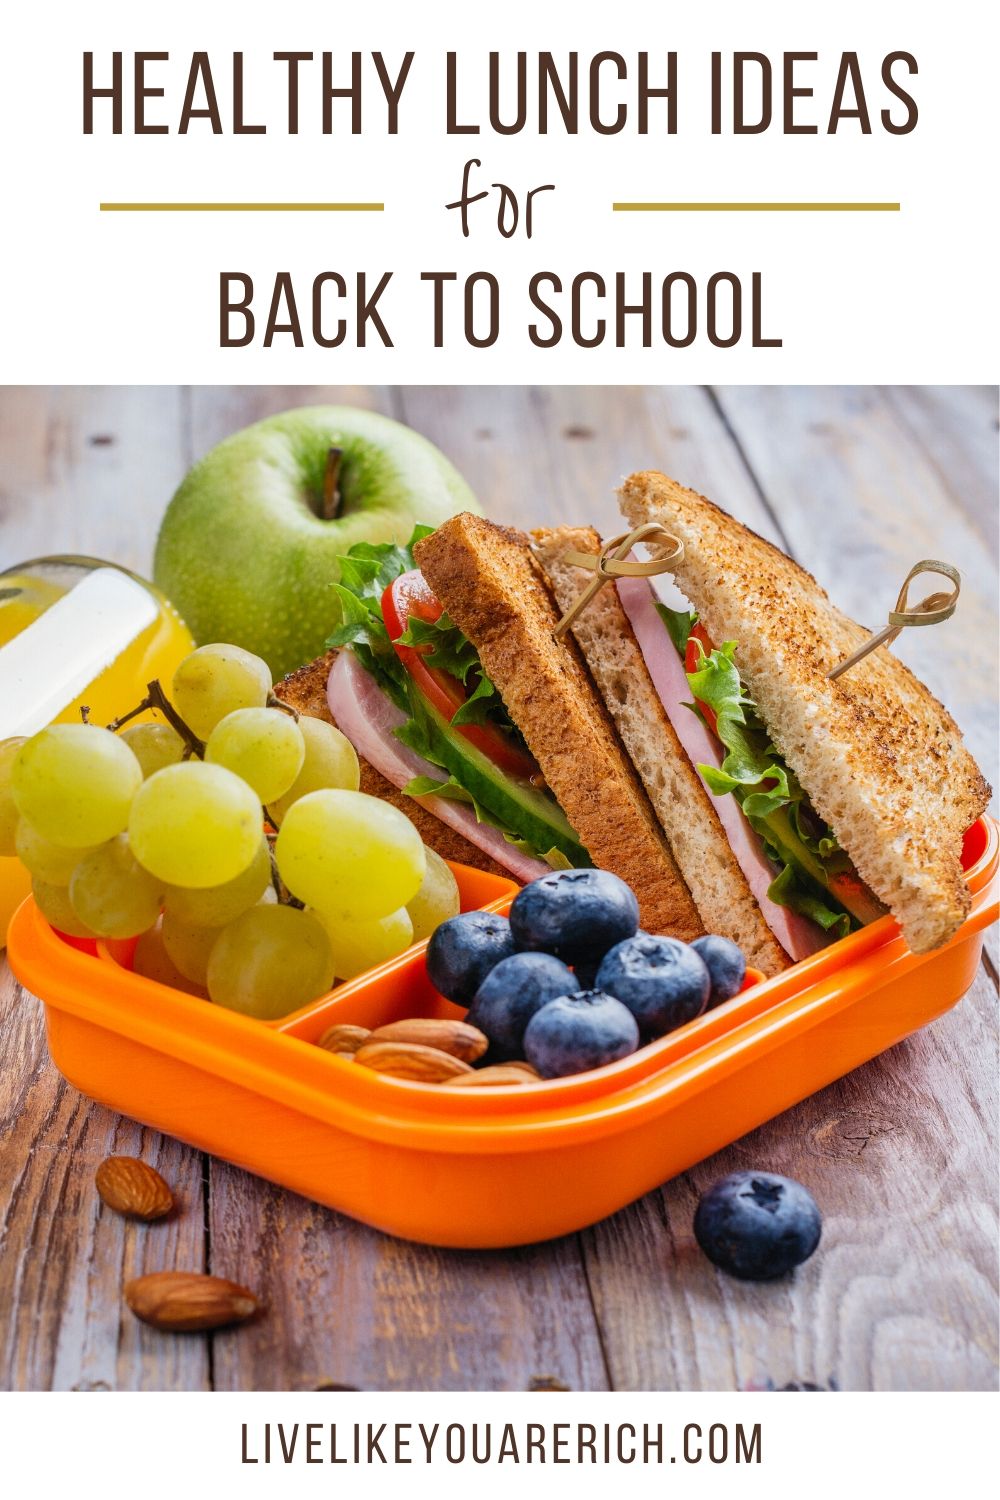 Going back to school is such a fun time of year for most children. I remember while growing up I looked forward to going back to school with great excitement. A few of the things I enjoyed were getting to know new teachers, healthy lunches, meet friends, etc. If you have any kids going back to school soon, you may find following tips and posts helpful.